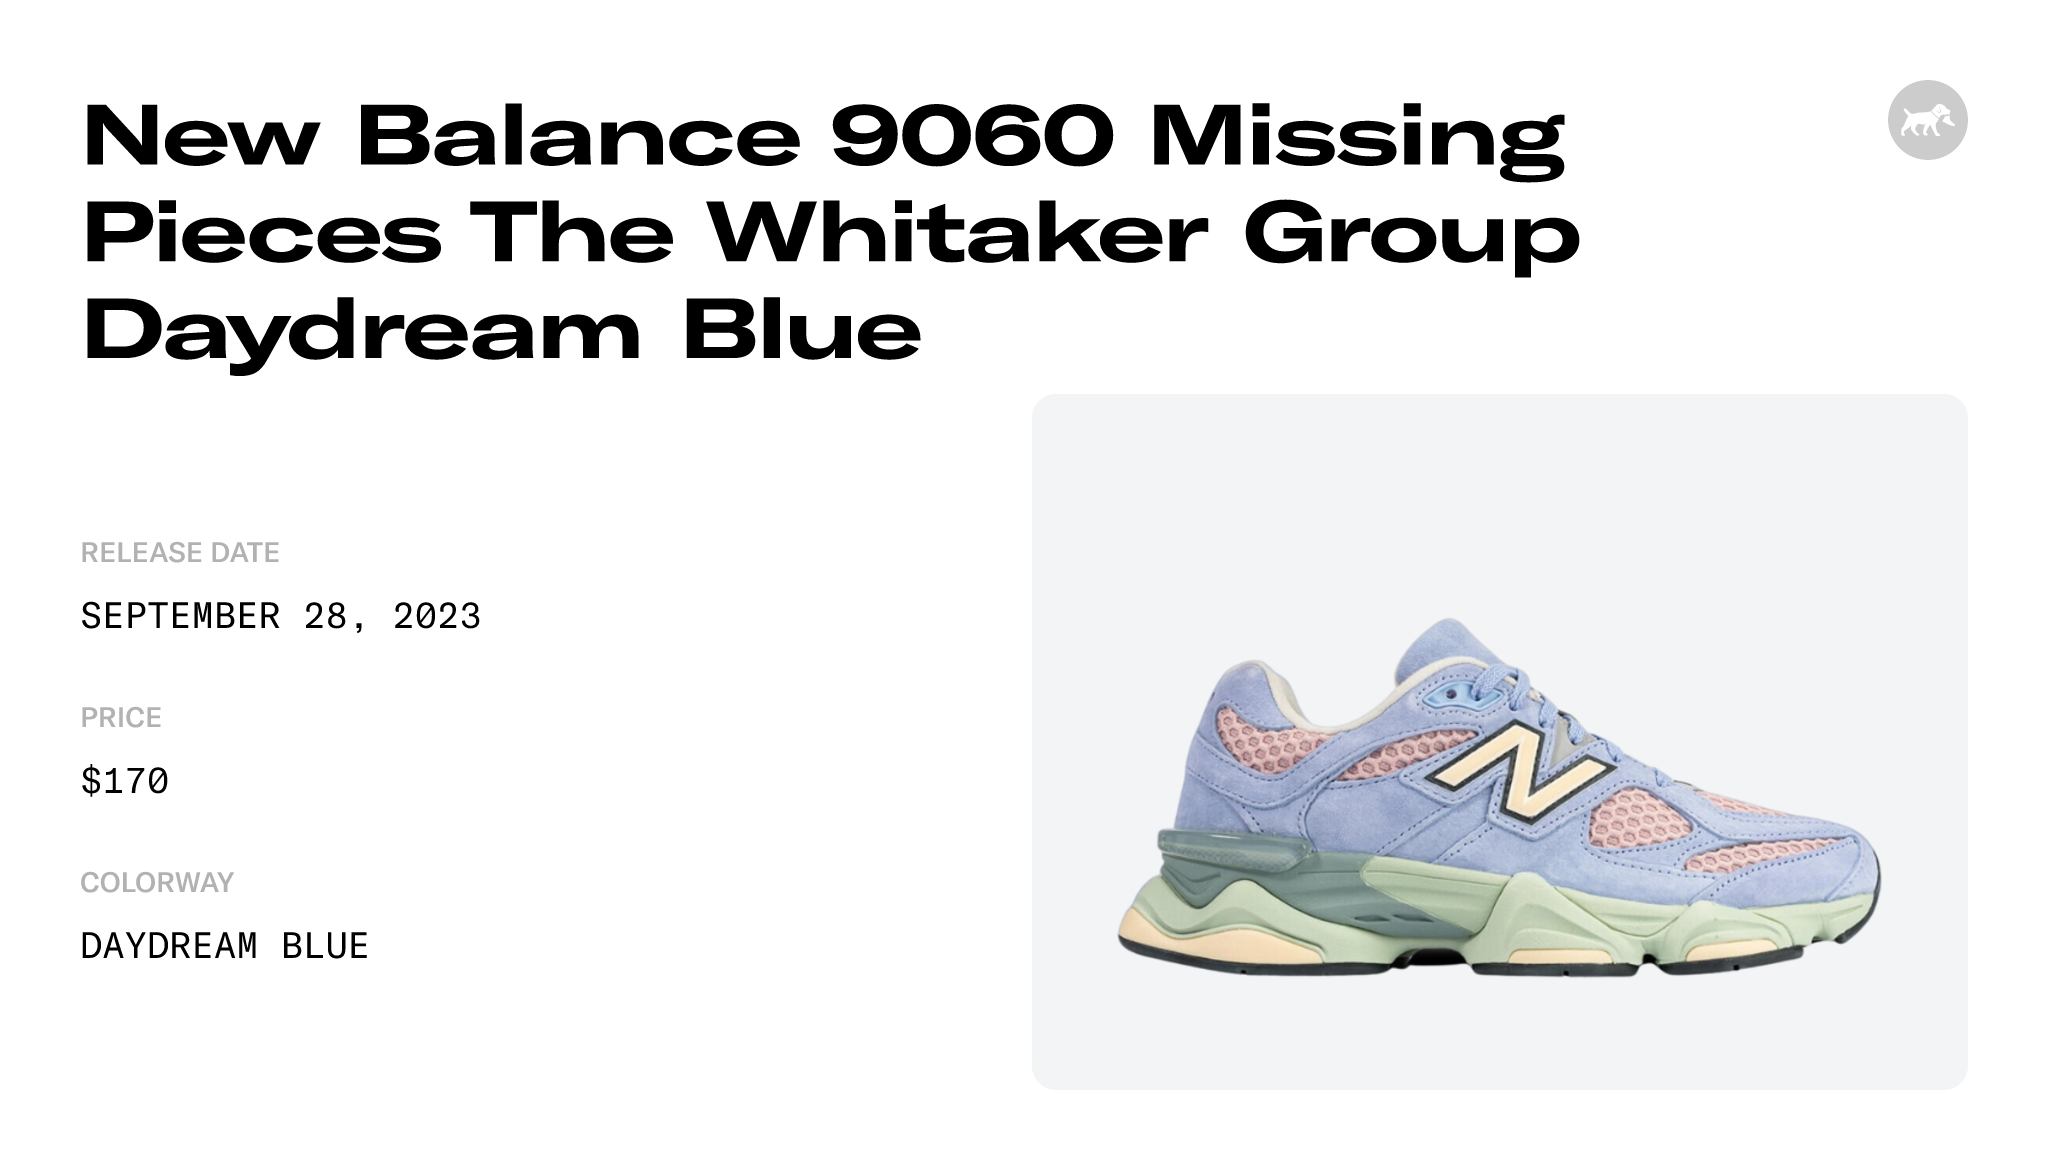 New Balance 9060 Missing Pieces The Whitaker Group Daydream Blue 